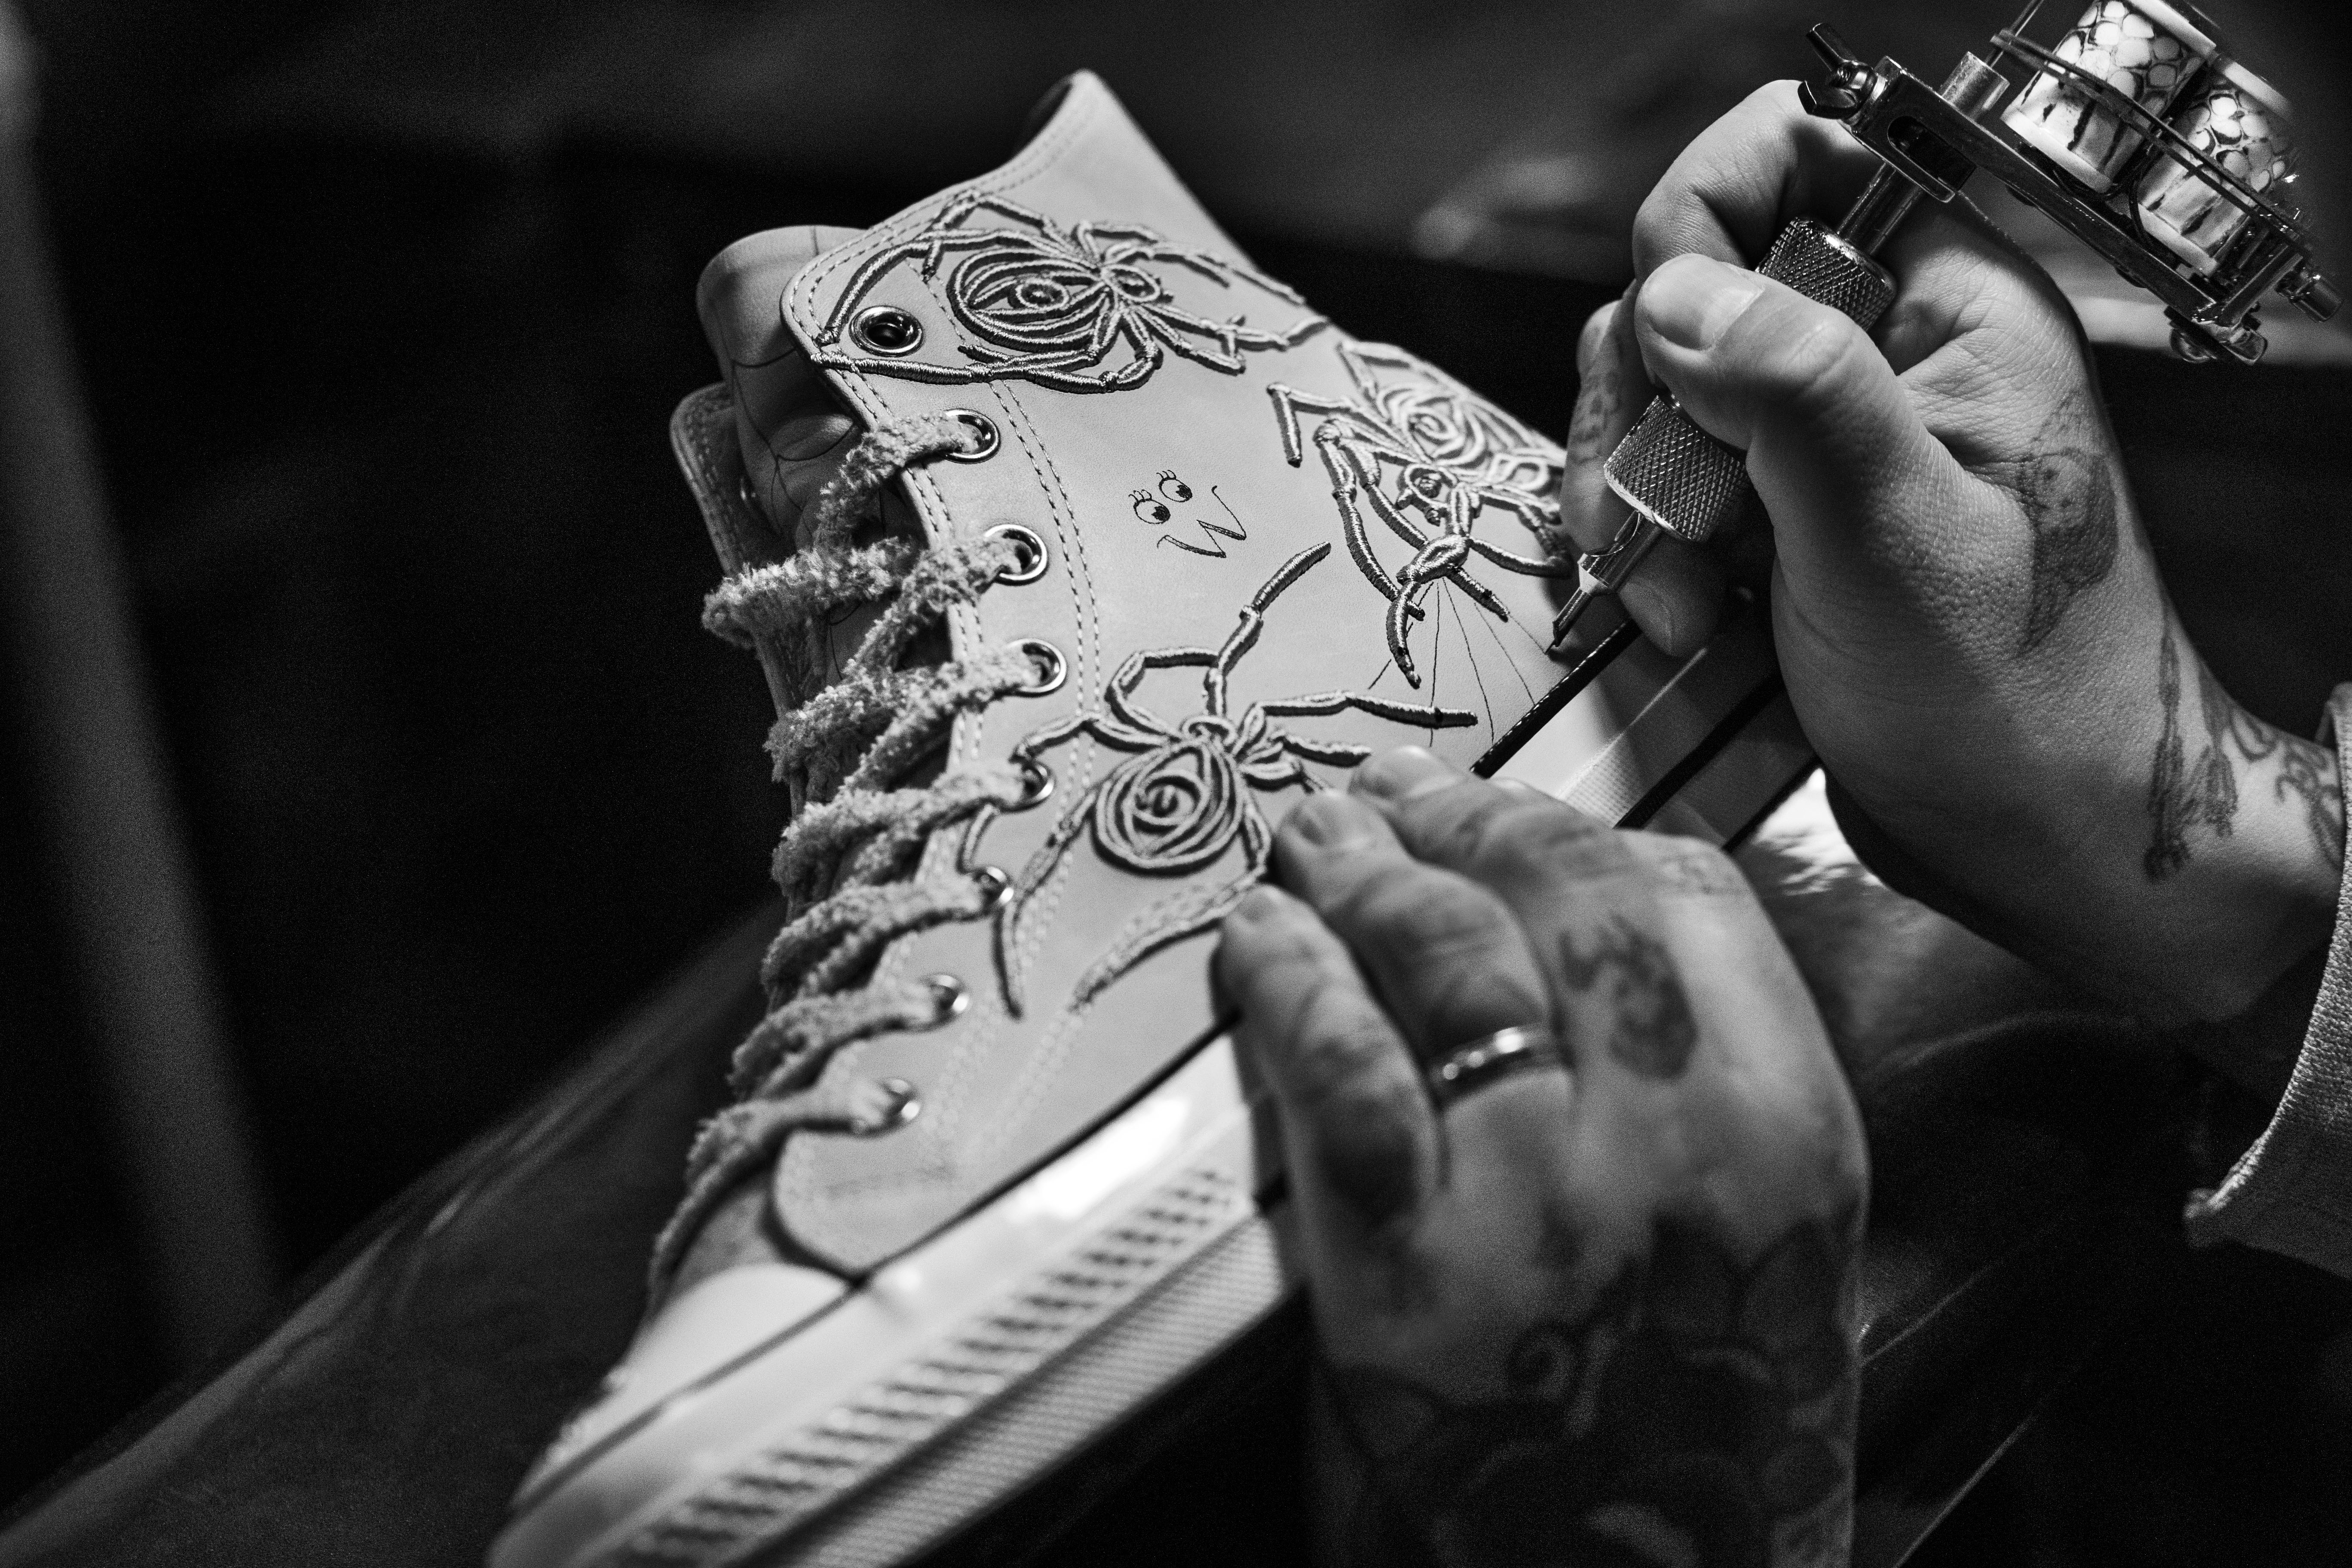 Tattoo uploaded by Ross Howerton  The goto lowtop Converse Chuck Taylor  All Star illustrated by Dan Smith IG dansmithism Converse DanSmith  kicks lowtop sneakerheads chucks realism chucktaylor  Tattoodo